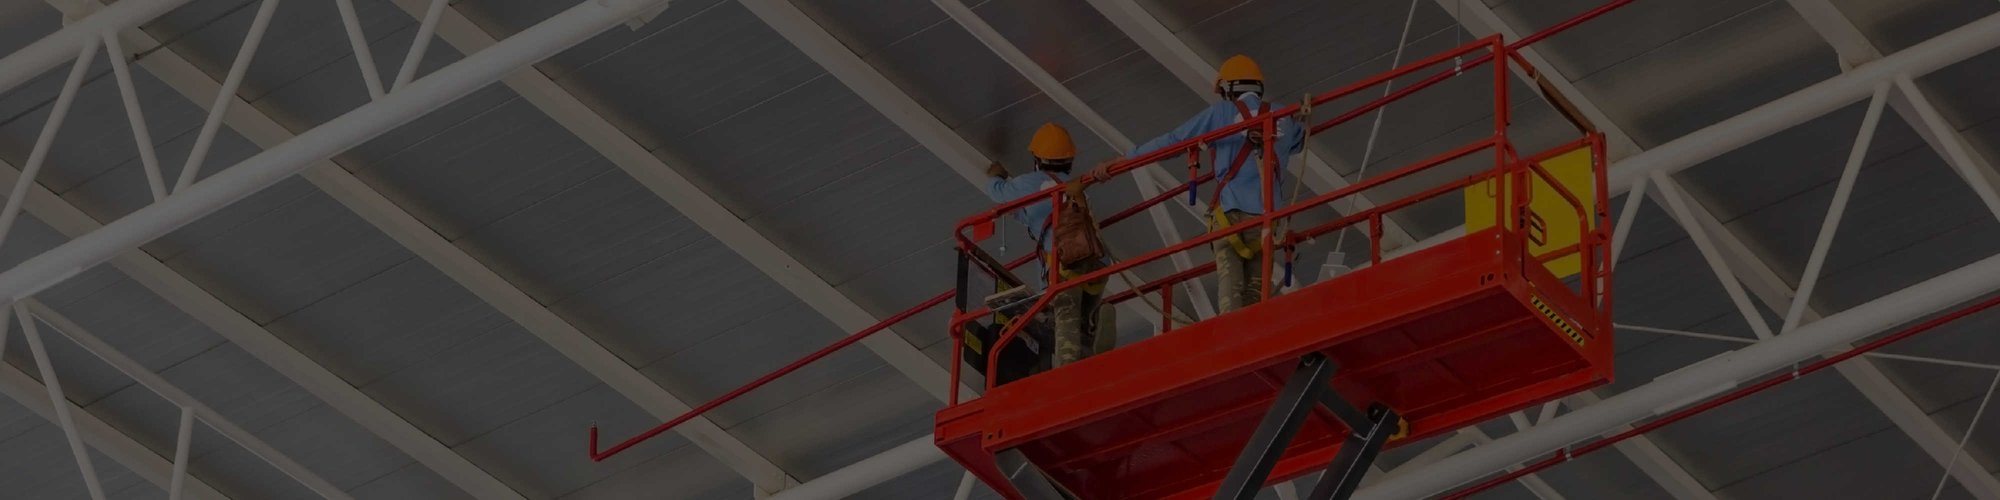 Workers on a scissor lift repairing a ceiling